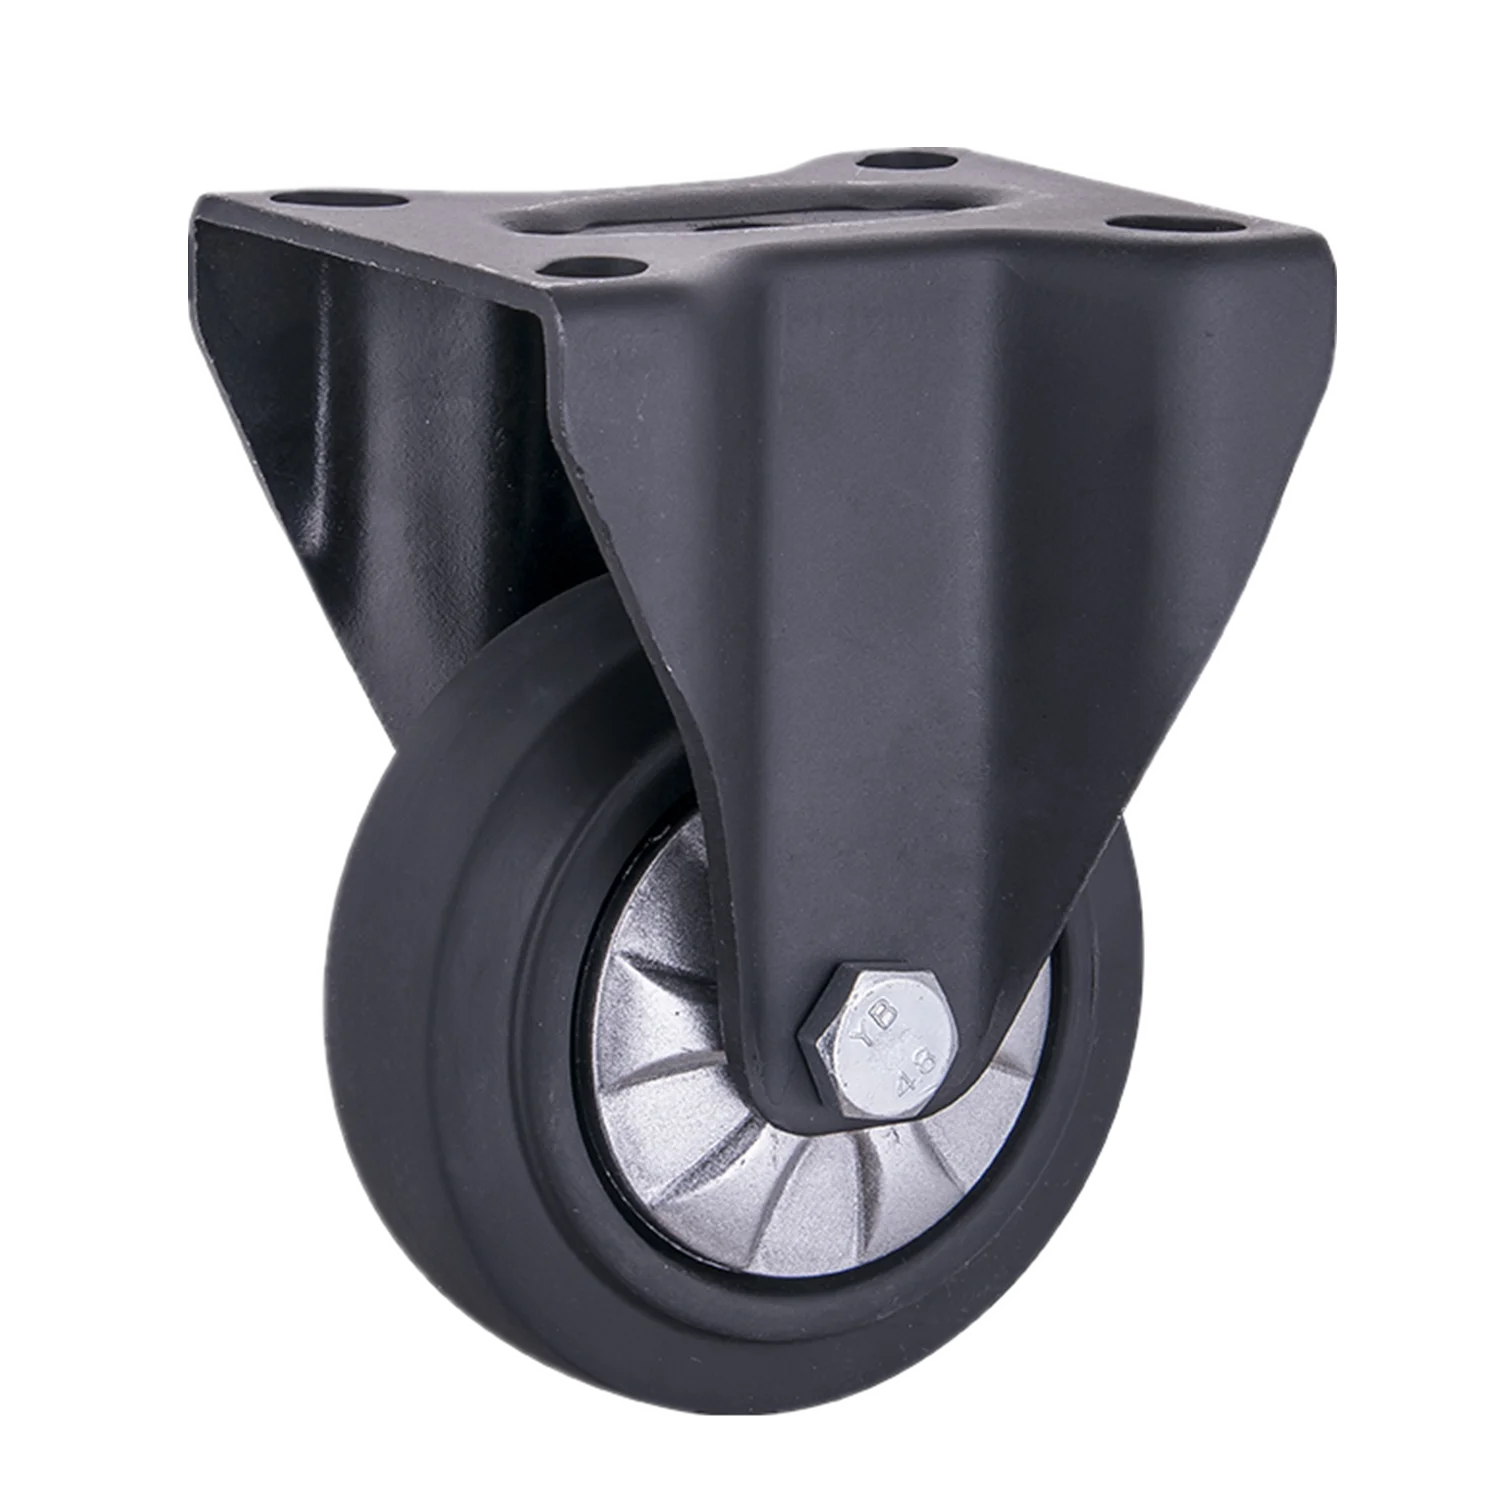 4"  Retractable Warehouse and Transportation Trolley Swivel Total Brake Black Elastic Thermoplastic Rubber Caster